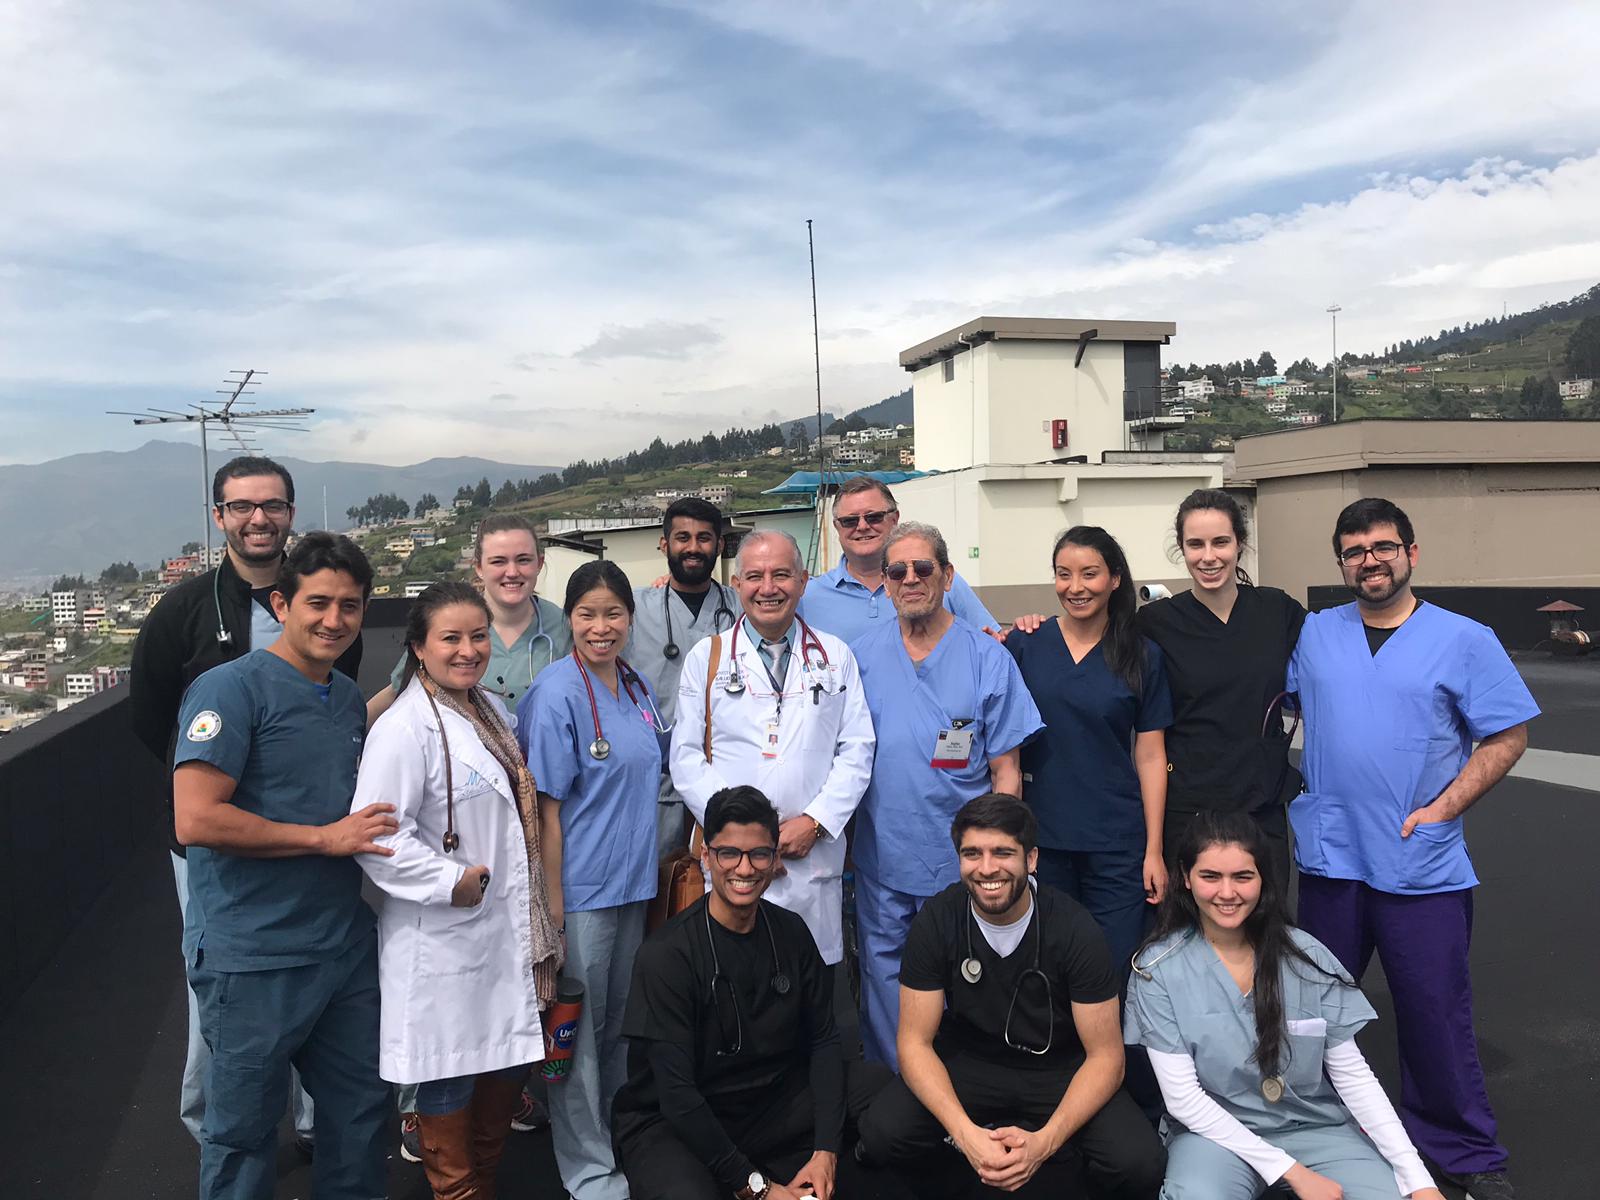 On the roof of the Enrique Garces Hospital with Dr. Freddy Trujillo, coordinator of Medical Education for the Hospital